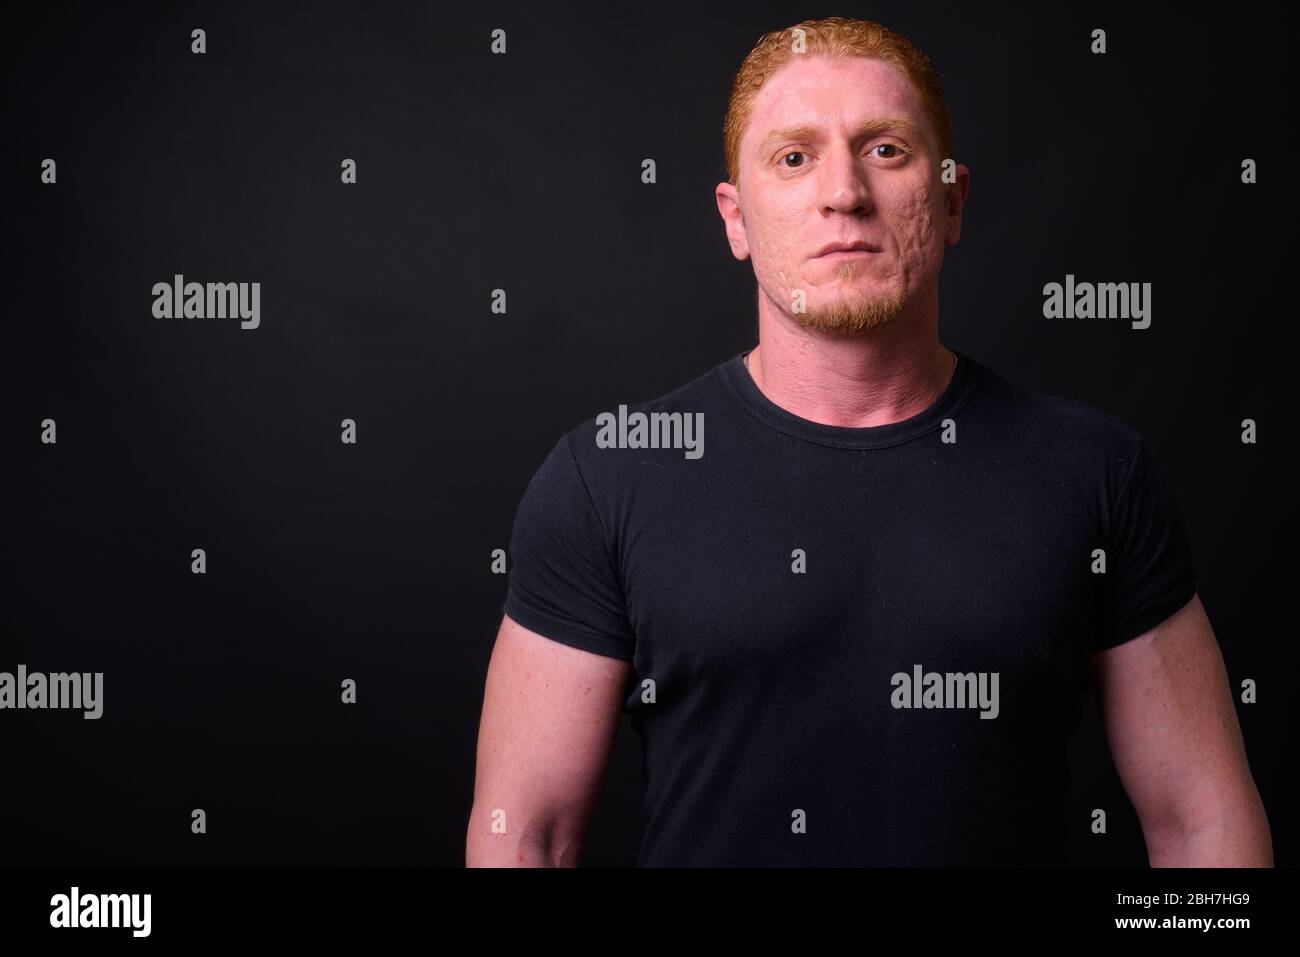 Portrait of muscular man with orange hair Stock Photo